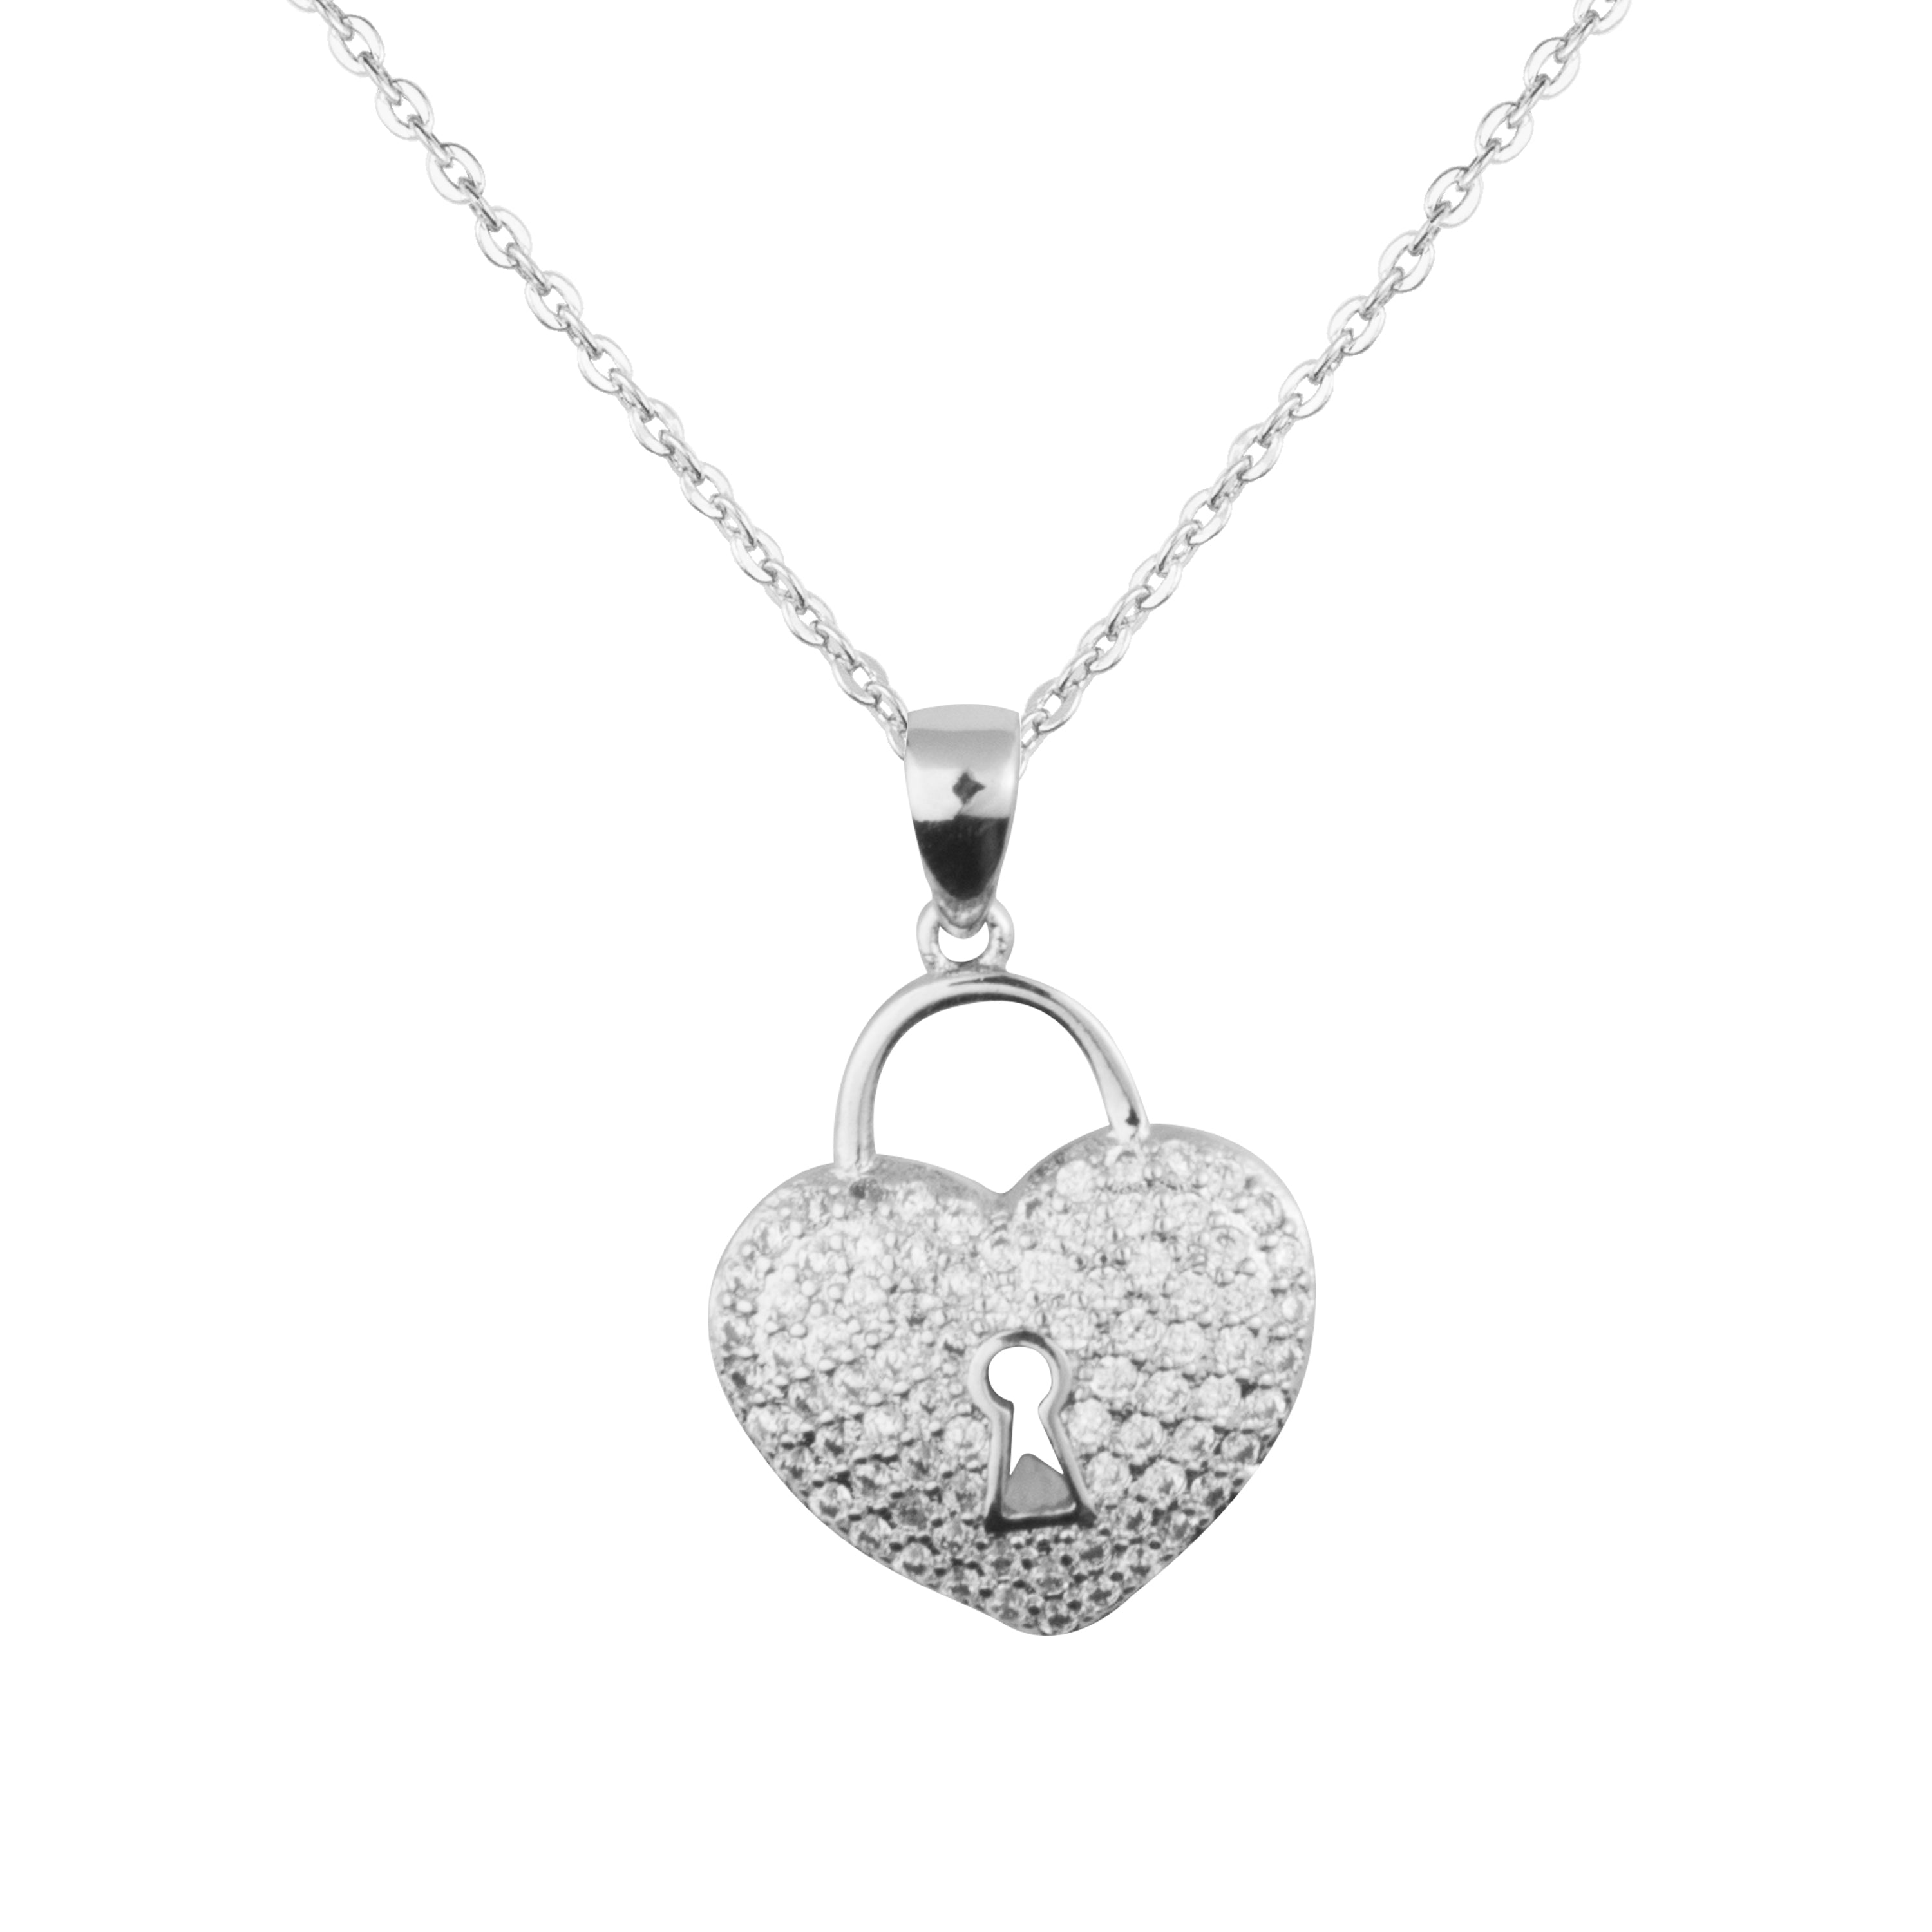 Heart and Heartbeat Necklace in Sterling Silver - 17